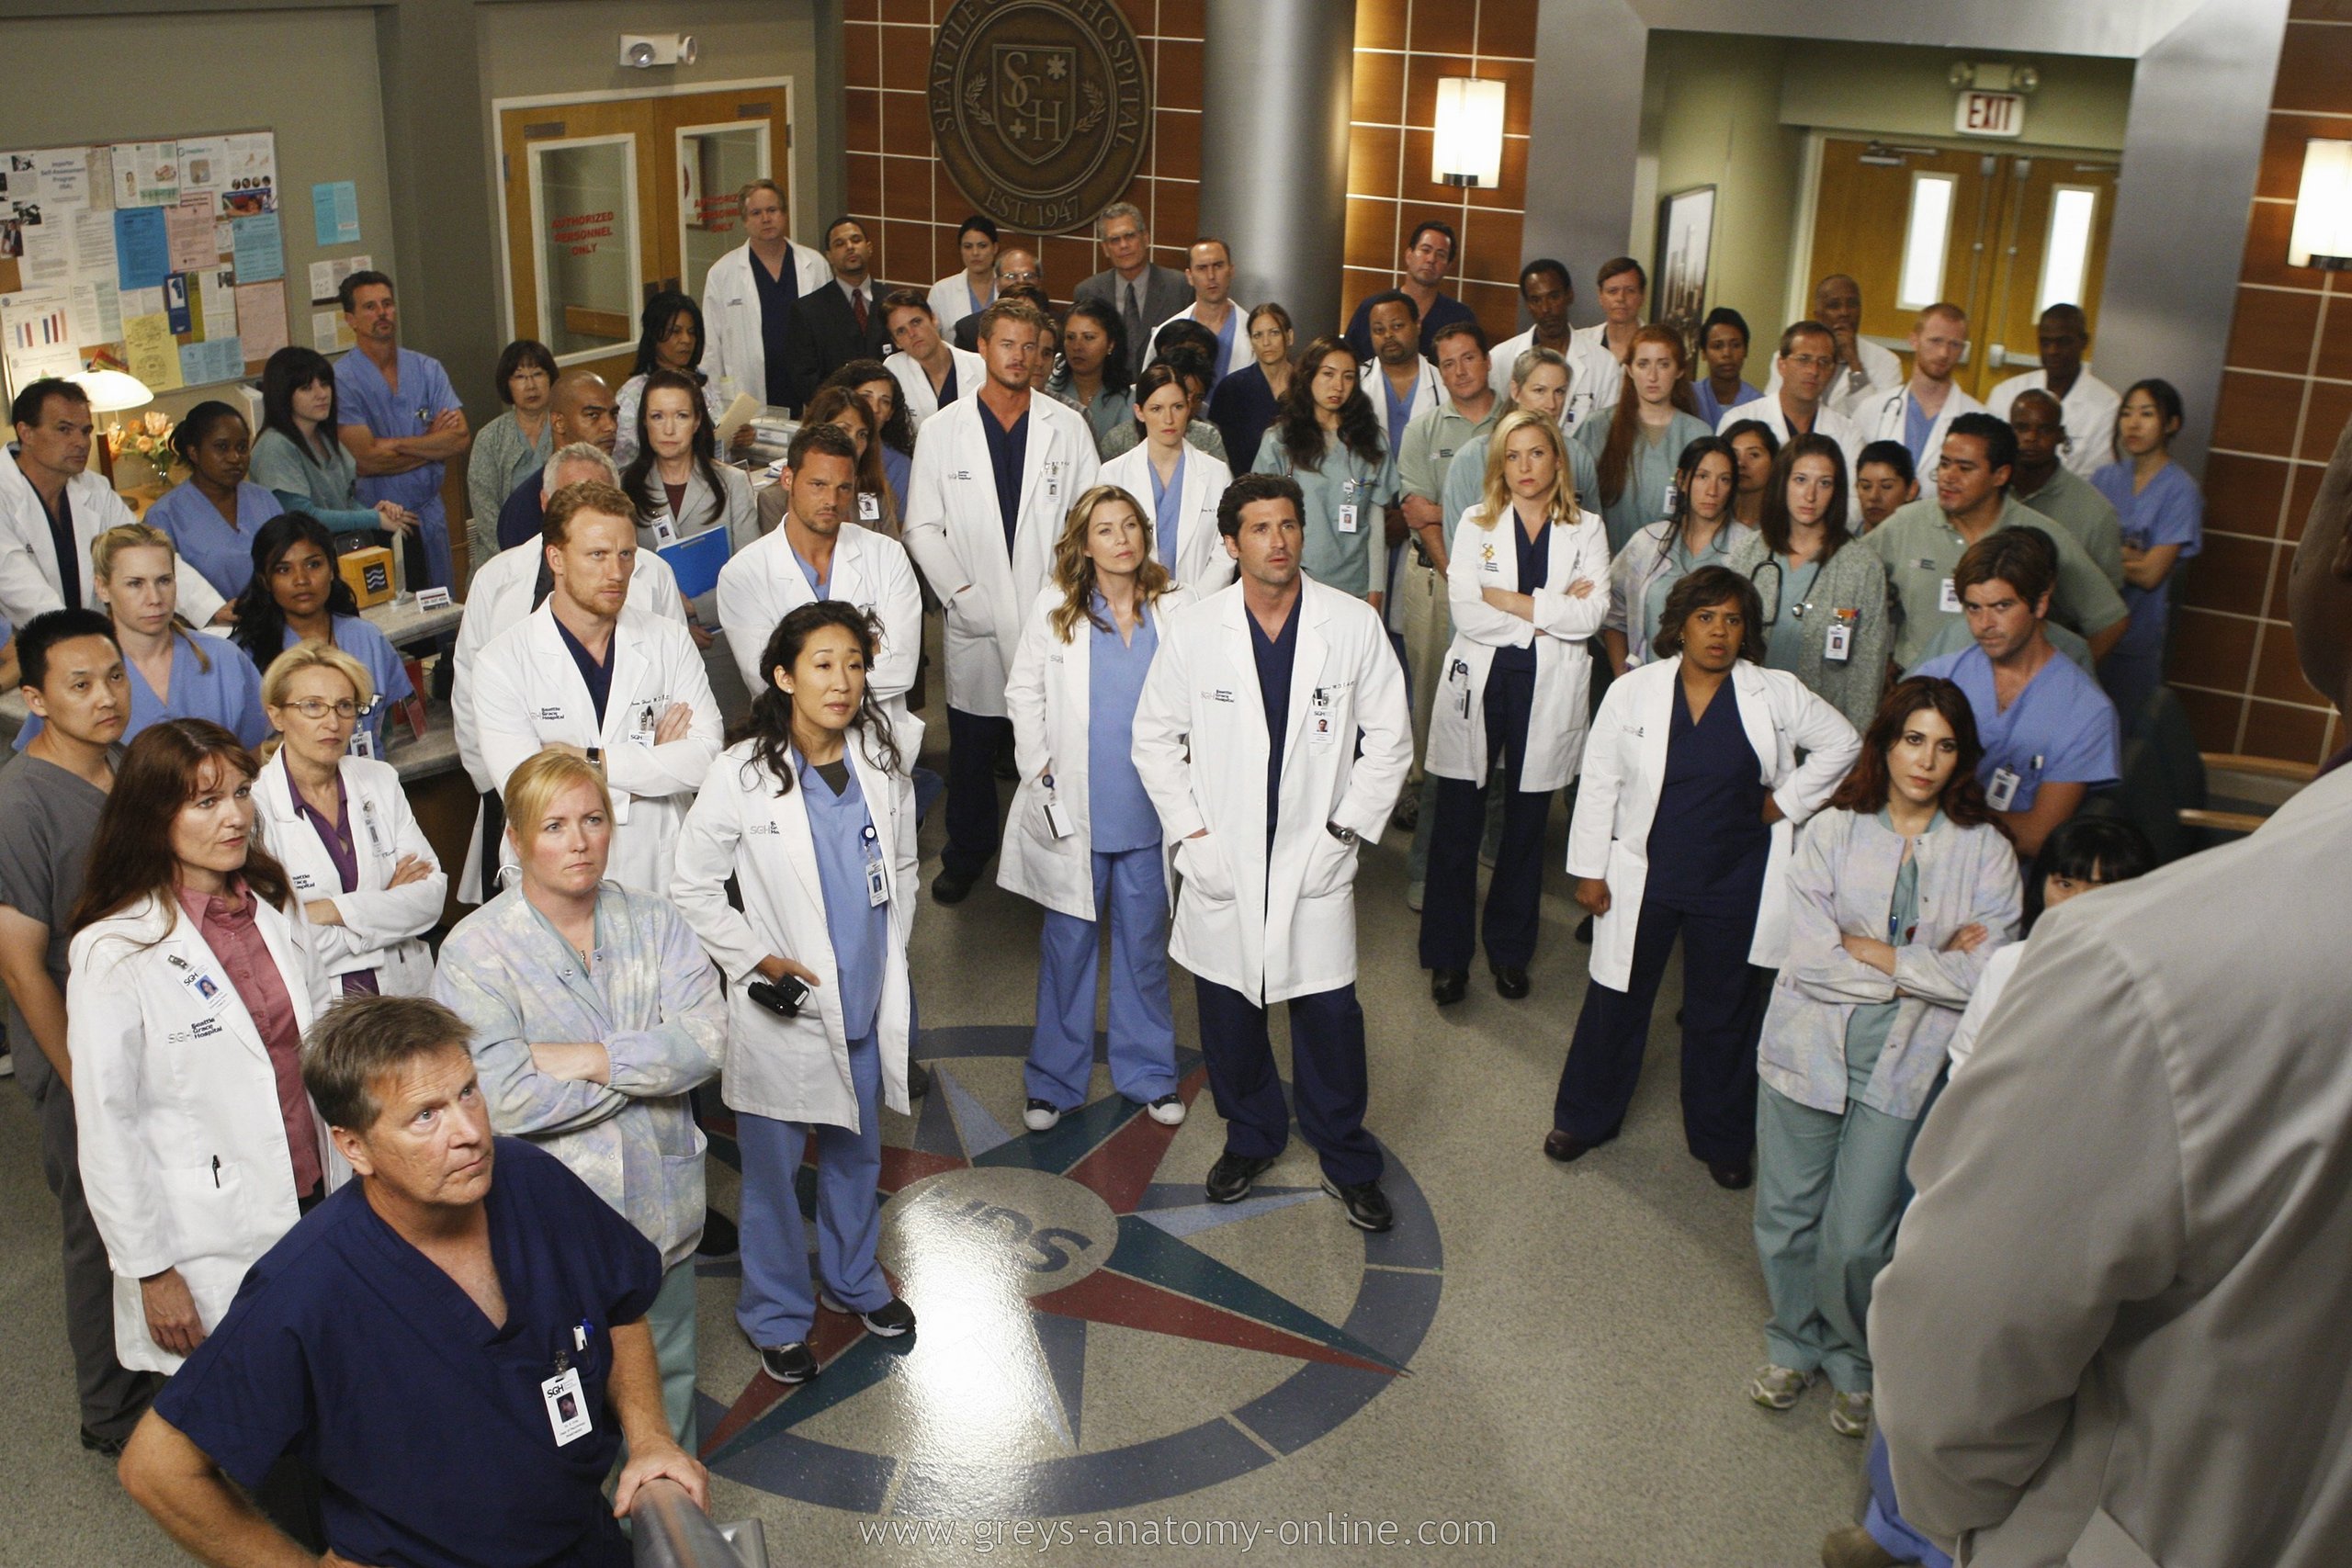 Grey's Anatomy- 6.01 promotional pictures - Fans of Grey's Anatomy Photo (8062332 ...2560 x 1707